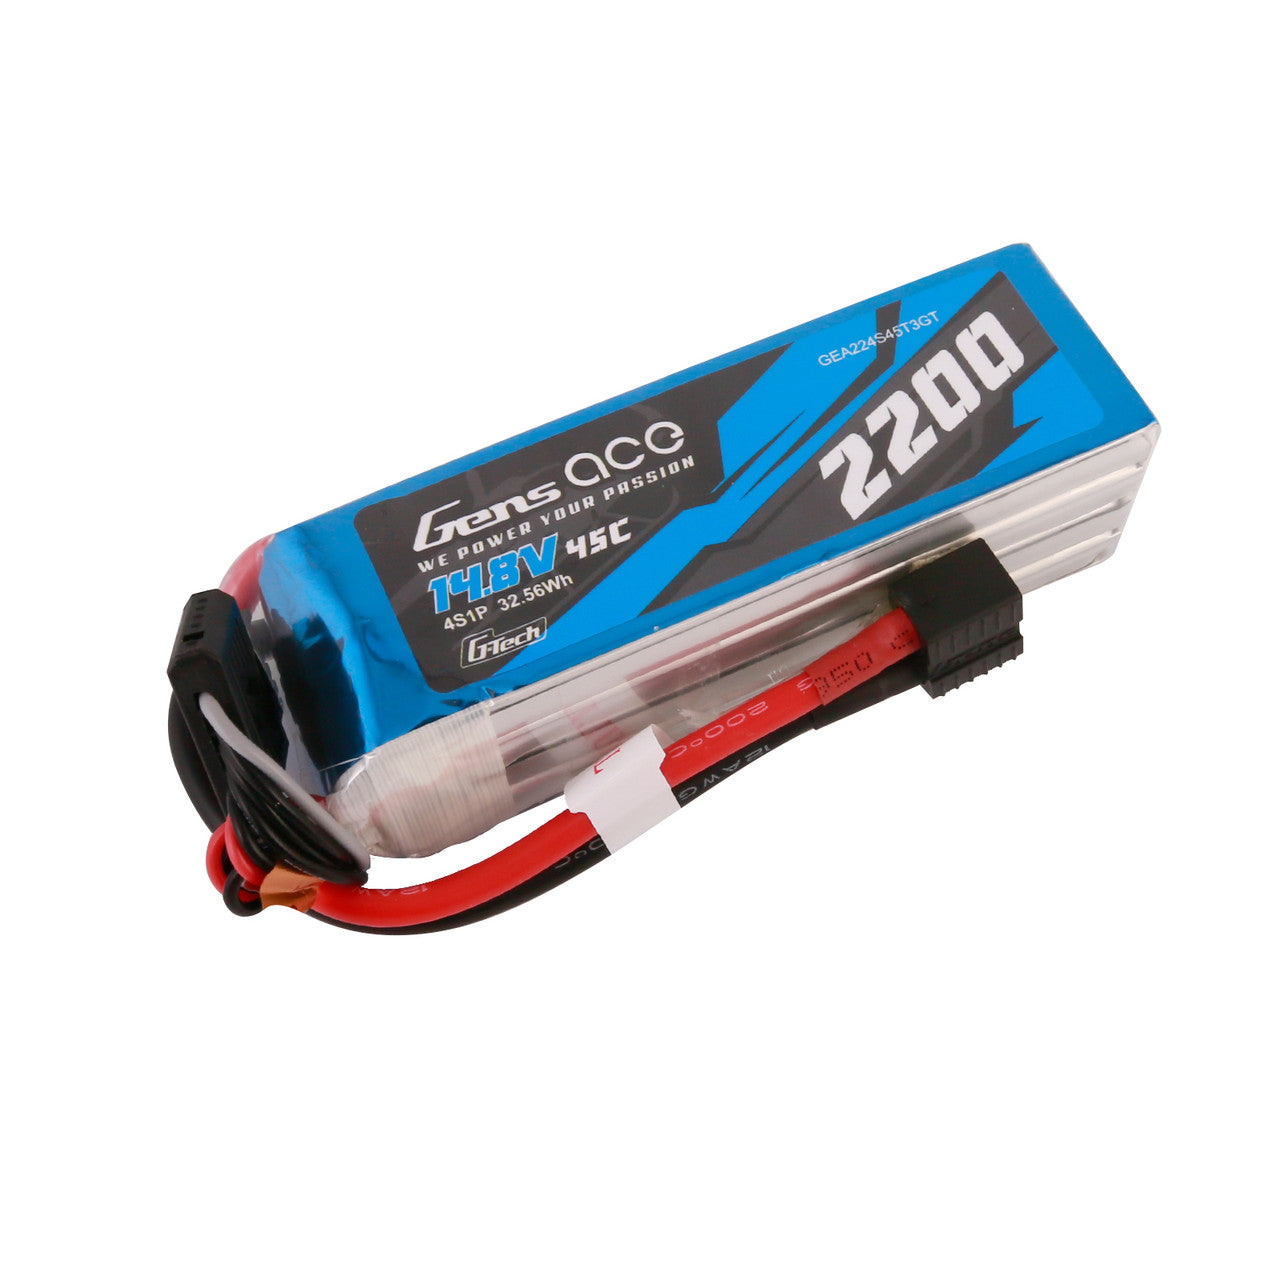 GEA224S45T3GT Gens Ace G-Tech 2200mAh 45C 14.8V 4S1P Lipo Battery Pack With EC3 And Deans Adapter